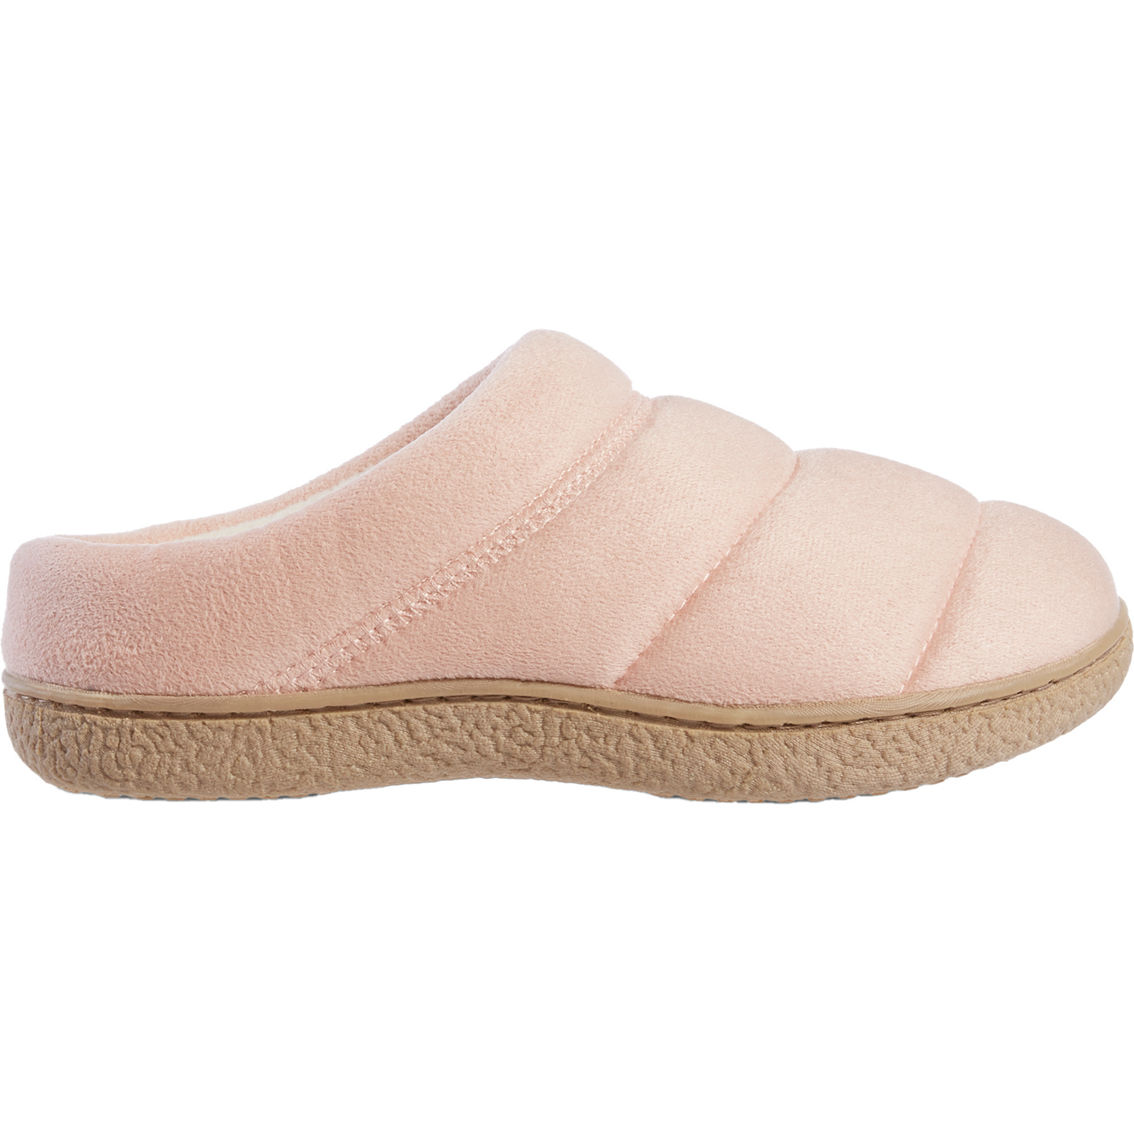 Isotoner Women's Totes Rory Recucled Microsuede Hoodback Slippers - Image 2 of 5